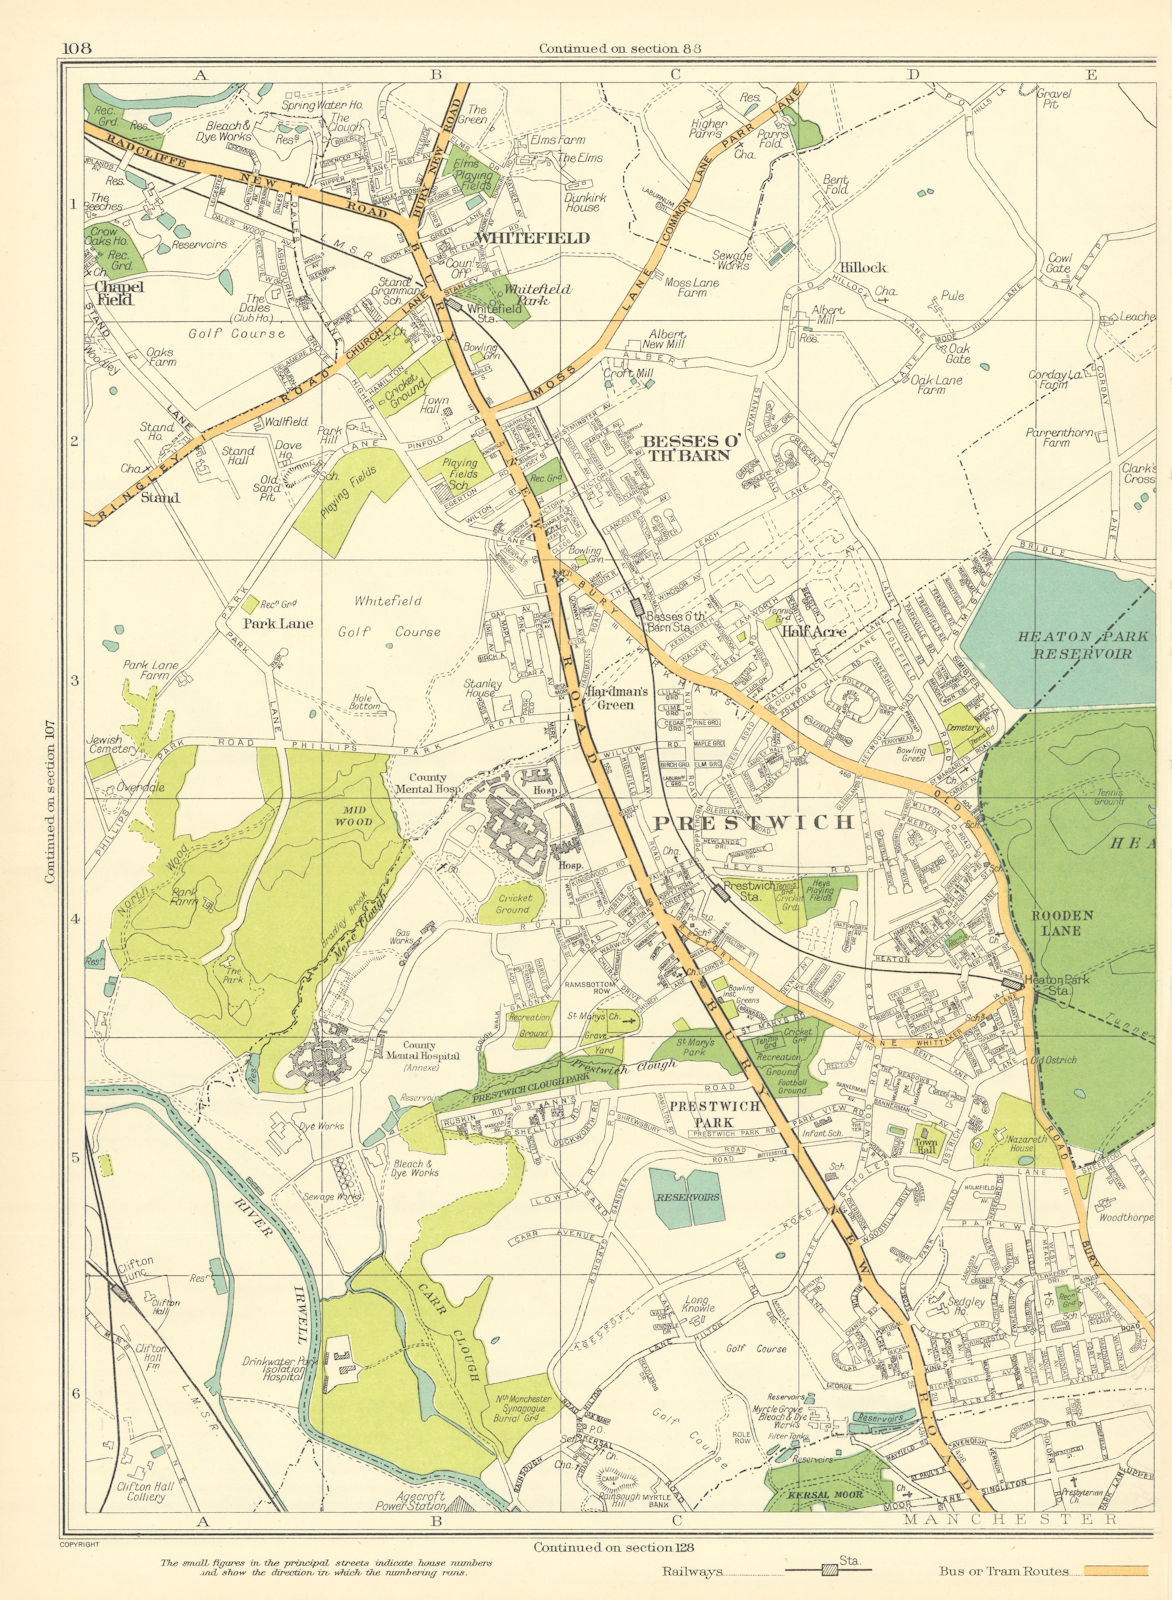 Associate Product LANCASHIRE Manchester Prestwich Whitefield Half Acre Besses o'Th'Barn 1935 map